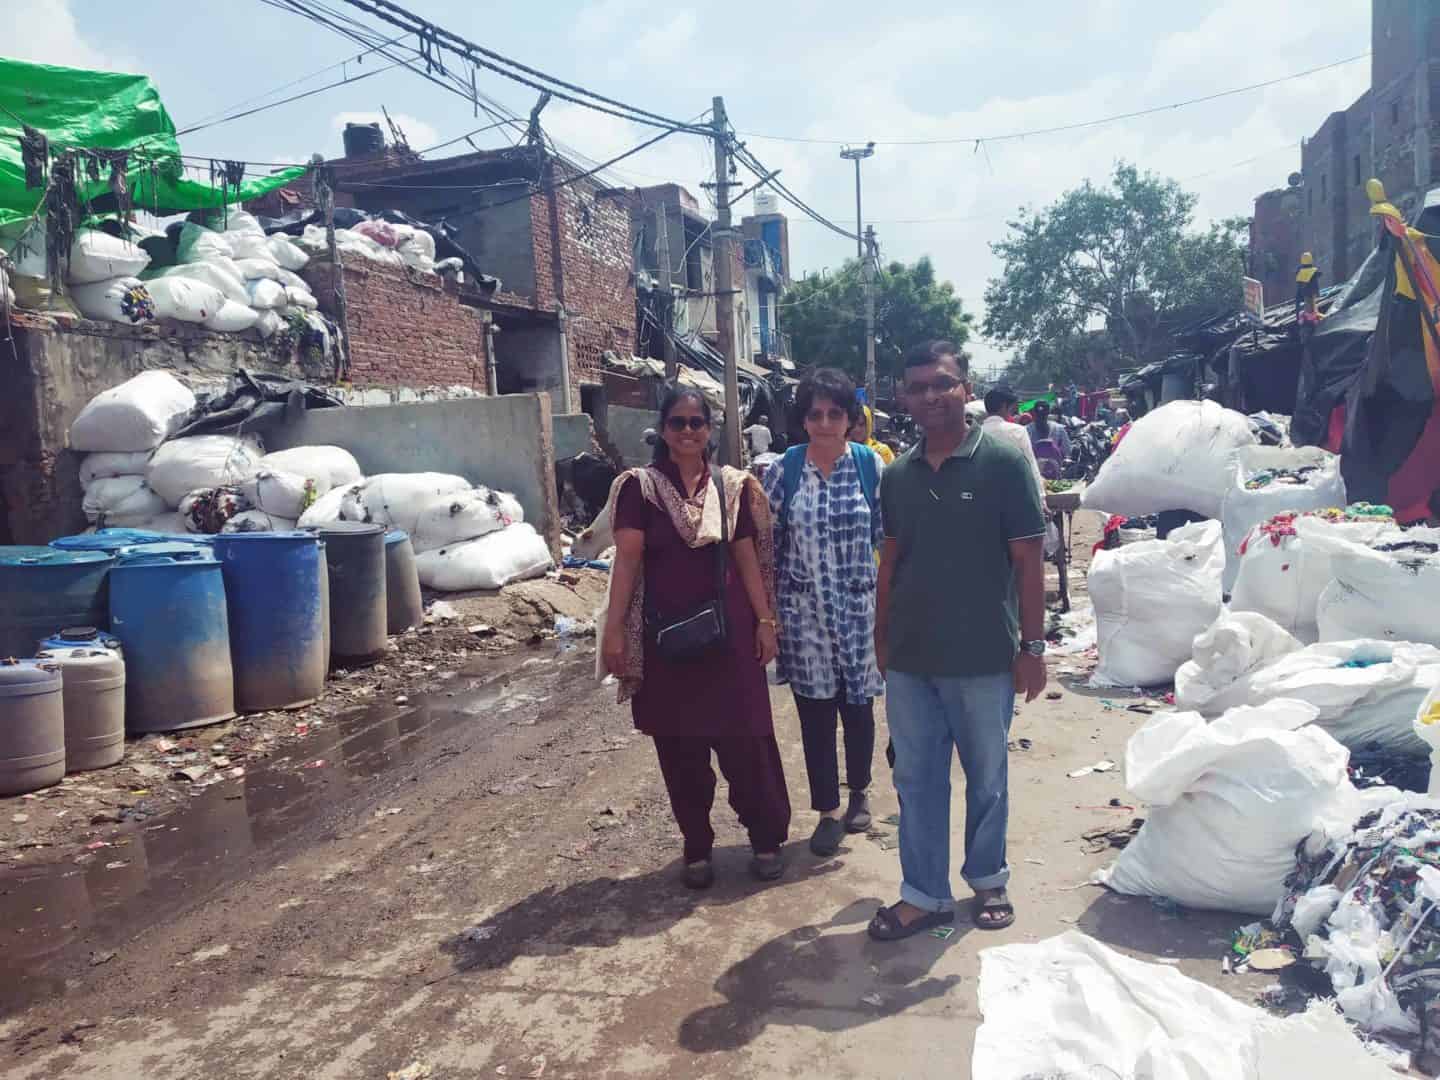 Three people standing in the middle of a dirty urban road, lined with trash on both sides